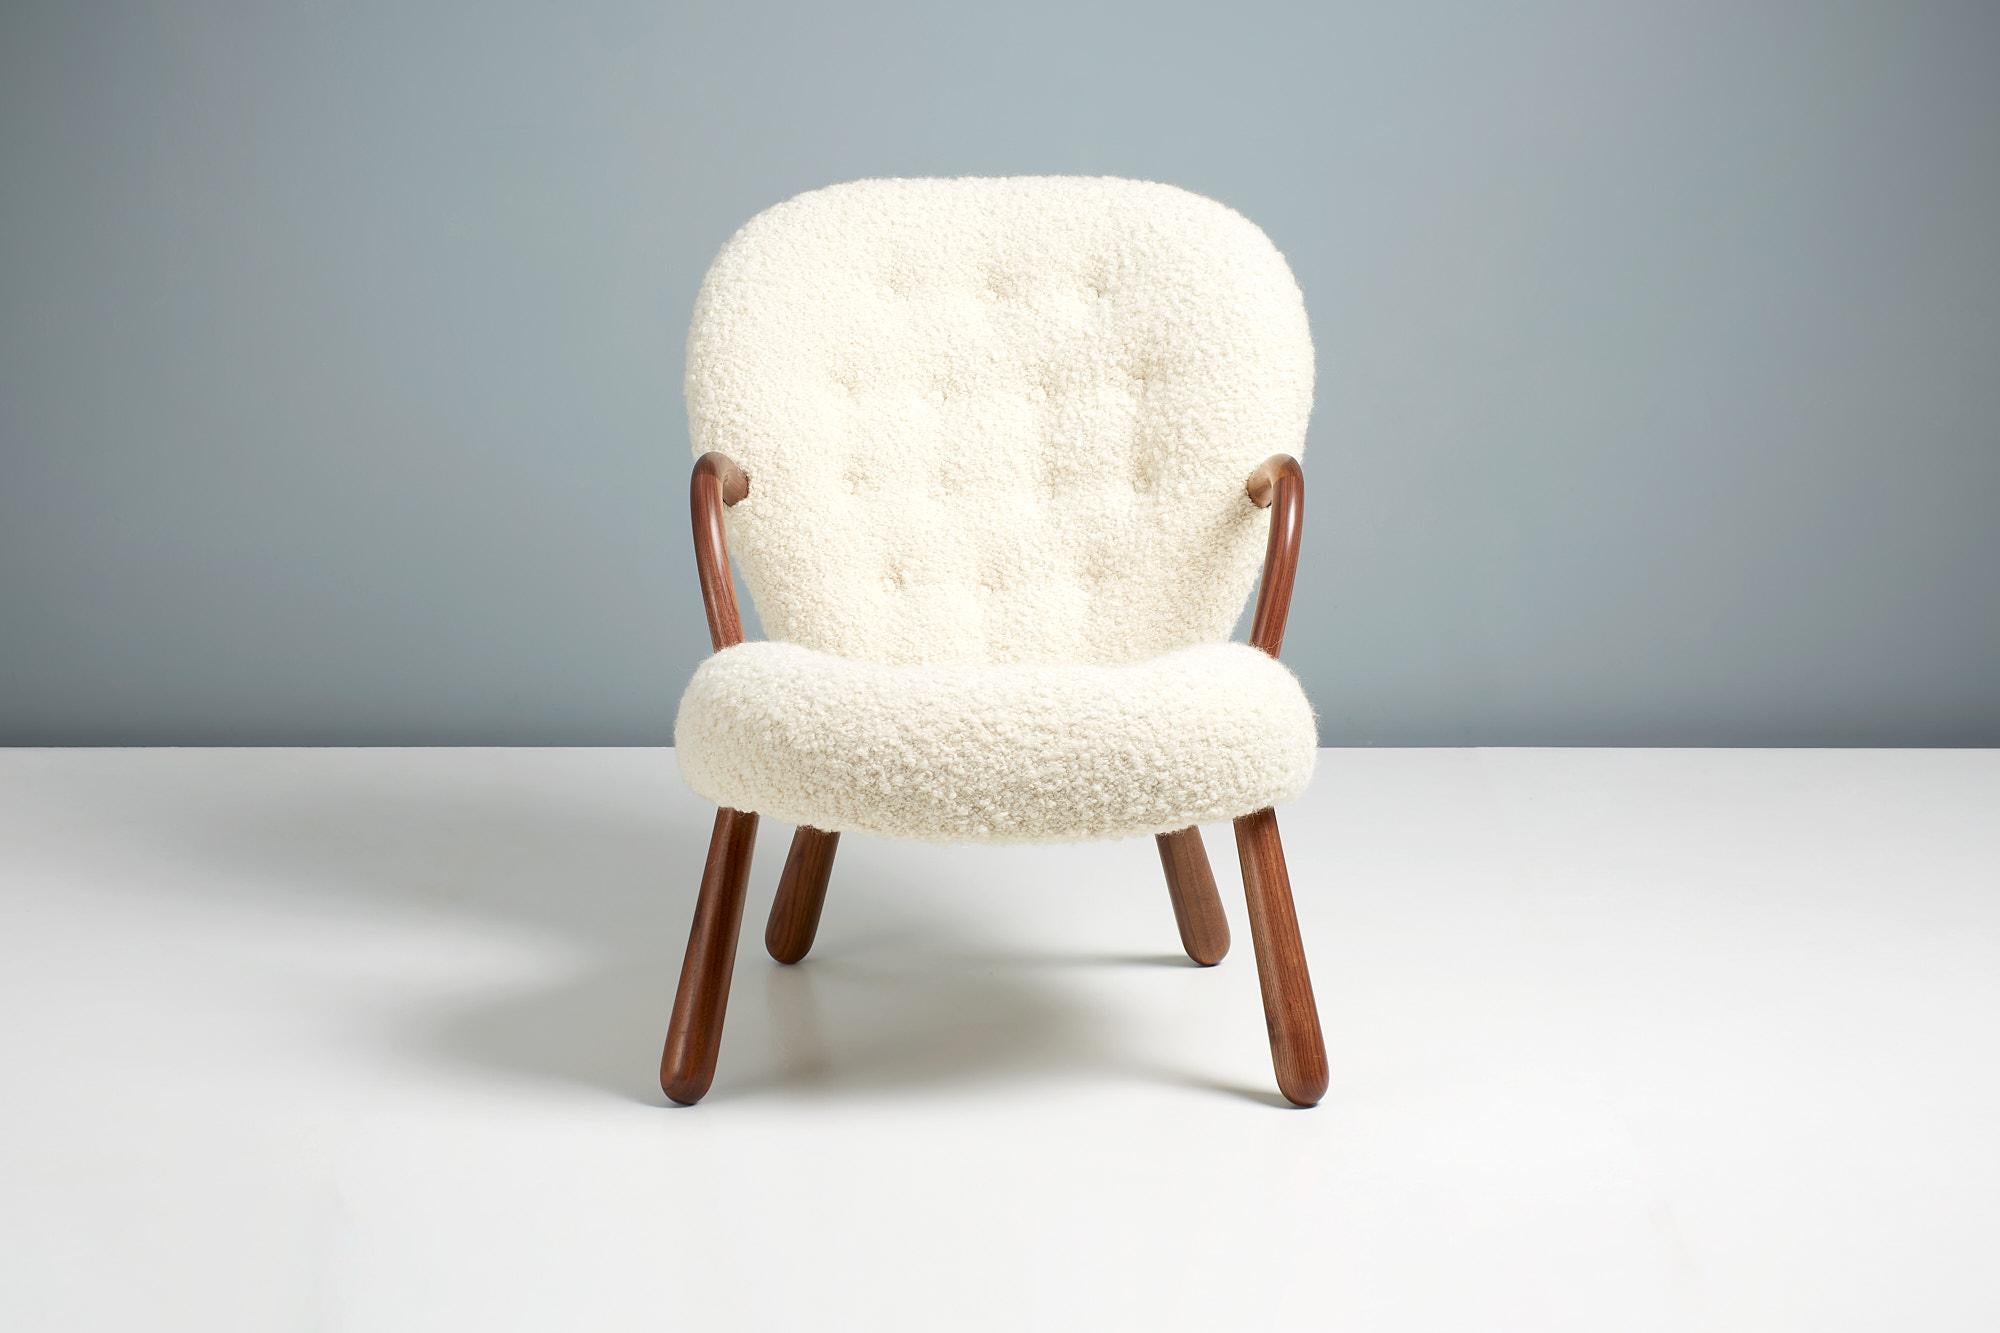 Official re-edition of the iconic clam chair by Arnold Madsen.

Dagmar in collaboration with the estate of Arnold Madsen is proud to re-launch the Clam Chair - one of the most cherished and sought after Scandinavian furniture designs of the 20th